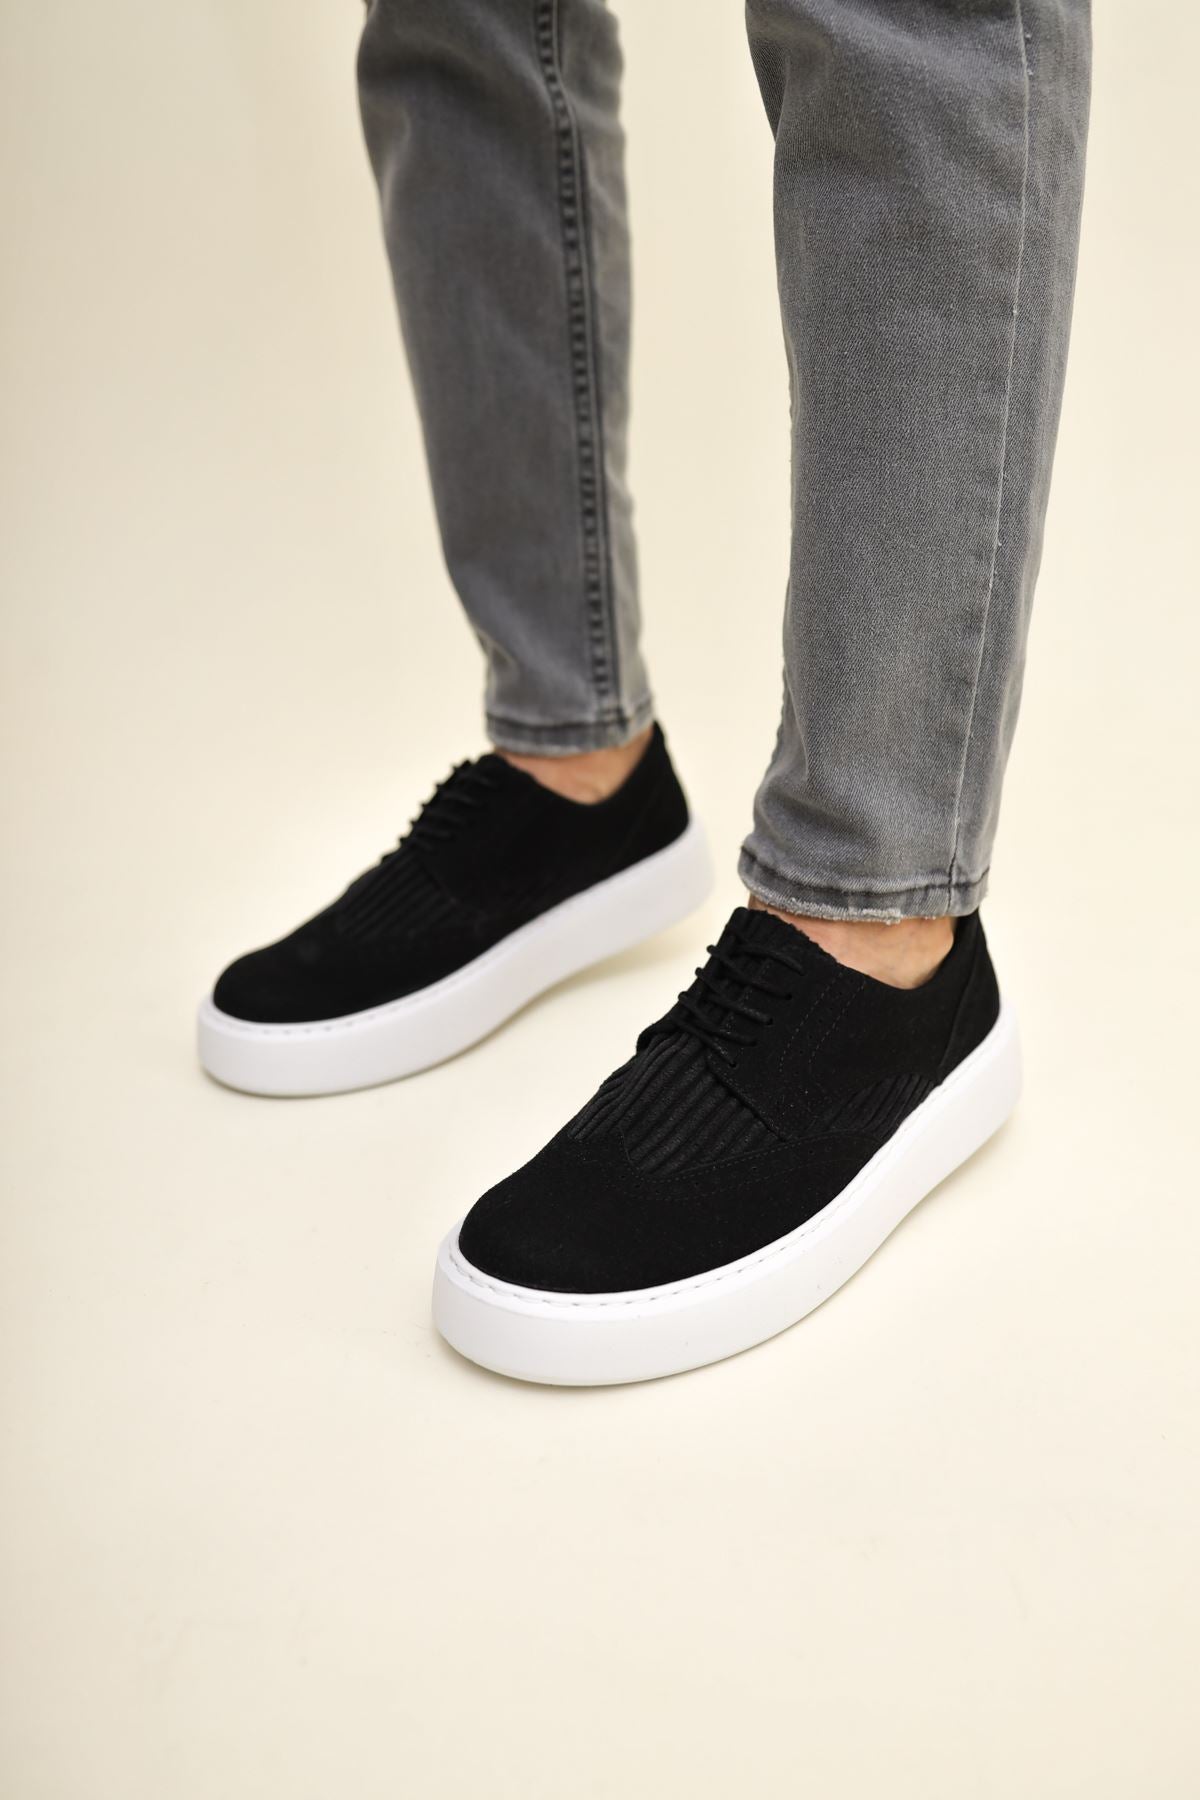 CH 149 Men's Sneakers Shoes BLACK Suede - STREETMODE™